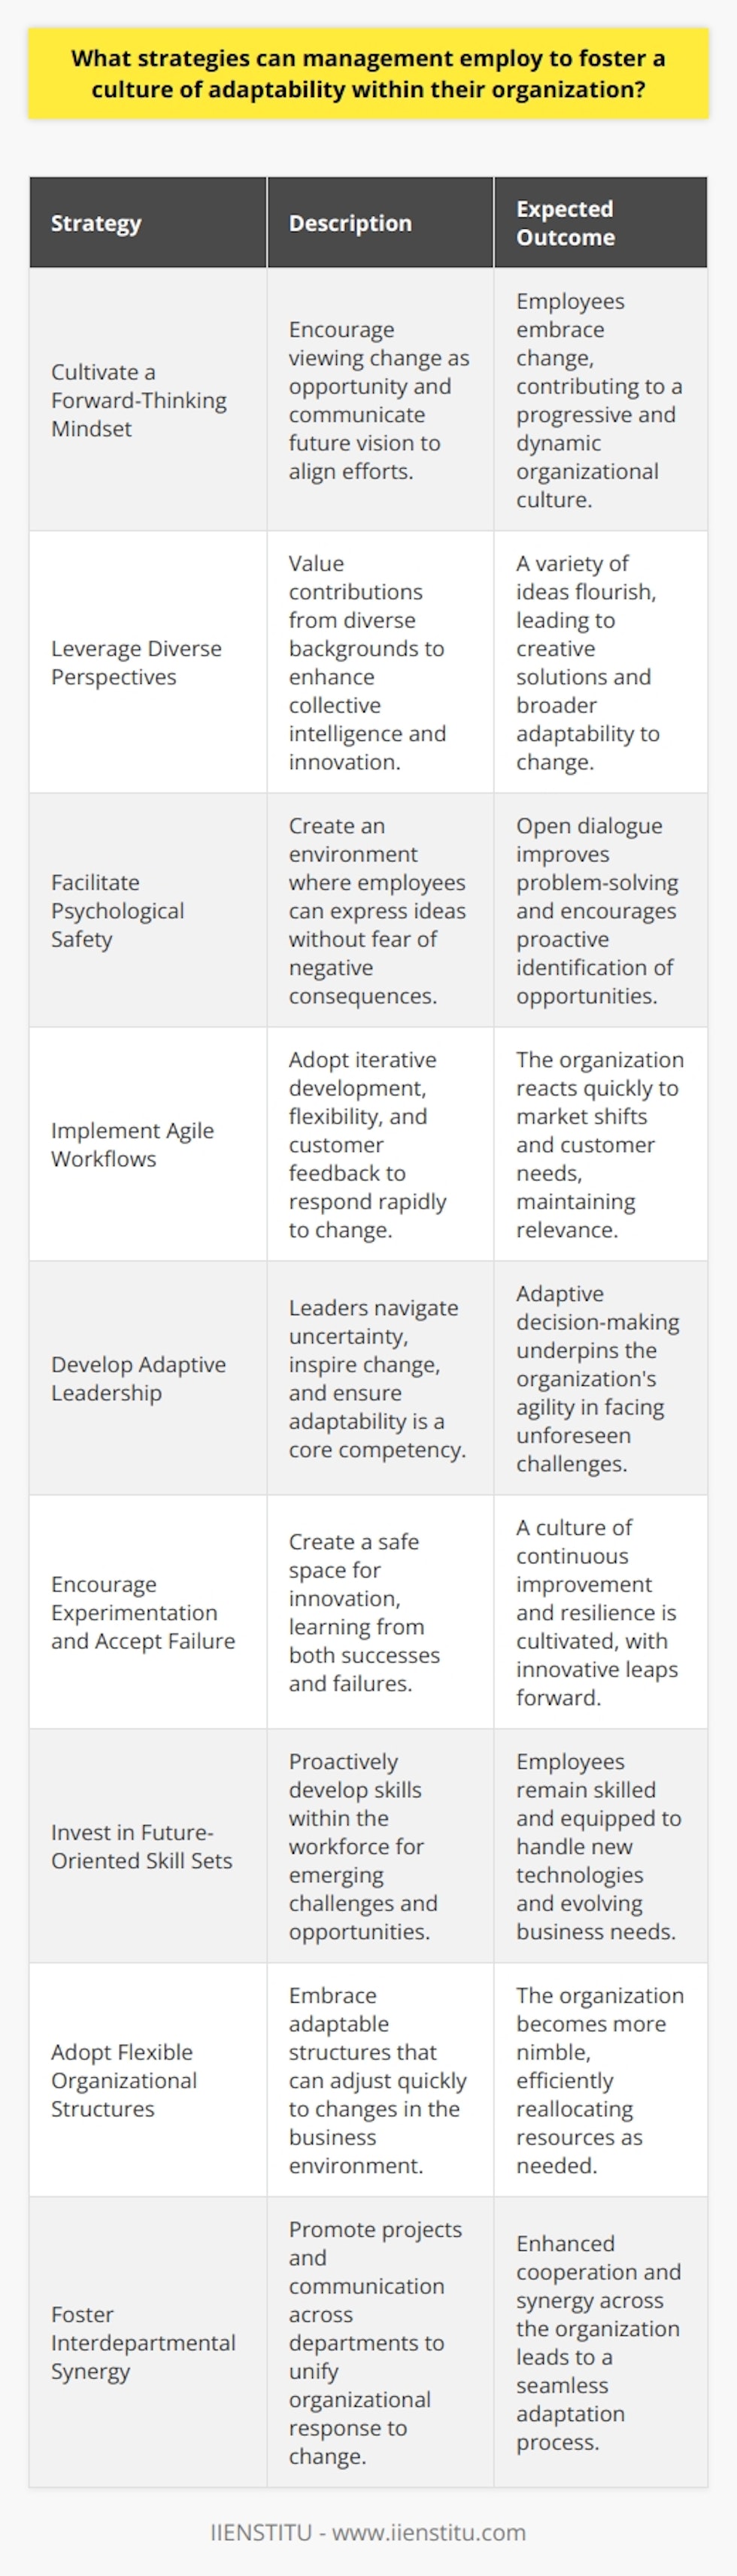 Creating a culture of adaptability within an organization requires thoughtful strategies that empower individuals and promote institutional resilience. The following strategies are essential for management teams looking to foster such an environment:**Cultivate a Forward-Thinking Mindset**Fostering a forward-thinking mindset is crucial. By encouraging employees to embrace change as an opportunity rather than a threat, management sets the stage for a more adaptable organization. This involves regularly communicating the vision for the future and the role of adaptability in achieving organizational goals.**Leverage Diverse Perspectives**Adaptability thrives in diverse environments where different perspectives are valued. Management should encourage employees from various backgrounds to contribute their unique viewpoints. This collective intelligence can drive innovation and enable the organization to adapt to a wide range of scenarios.**Facilitate Psychological Safety**Creating a psychologically safe workplace is fundamental in establishing adaptability. When employees feel safe to voice their opinions without fear of retribution, they are more likely to raise concerns and suggest improvements, thereby enhancing the organization's ability to adapt.**Implement Agile Workflows**Incorporating agile methodologies can help businesses respond rapidly to change. Agile workflows focus on iterative development, flexibility, and customer feedback. By adopting agile practices, organizations can pivot efficiently in response to fluctuating market demands or unexpected challenges.**Develop Adaptive Leadership**Adaptive leaders are those who can navigate uncertainty and foster a climate where adaptability is viewed as a core competency. They should possess the ability to scan the environment, interpret complex information, make decisions, and inspire others to embrace change.**Encourage Experimentation and Accept Failure**An organization's ability to innovate depends significantly on its willingness to experiment—and accept failure as part of the process. Management should create a safe environment for experimentation, where lessons from failures are valued just as much as successes.**Invest in Future-Oriented Skill Sets**Organizations need to identify the skill sets that will be in demand in the future and invest in the development of these skills within their workforce. This proactive approach ensures that employees are always ready to meet new challenges.**Adopt Flexible Organizational Structures**Rigid structures can be an impediment to adaptability. Management ought to adopt flexible structures that can be reshaped as circumstances change, ensuring that the organization can swiftly realign its resources and priorities when necessary.**Foster Interdepartmental Synergy**When different parts of an organization work in harmony, adaptability is enhanced. Managers should encourage interdepartmental projects and communication to ensure a cohesive and seamless response to change.By implementing these strategies, management can develop an organizational culture that not only copes with change but thrives on it. Each of these approaches plays a vital role in creating an ecosystem of adaptability, enabling organizations to navigate the complex and rapidly evolving business landscapes of the 21st century.